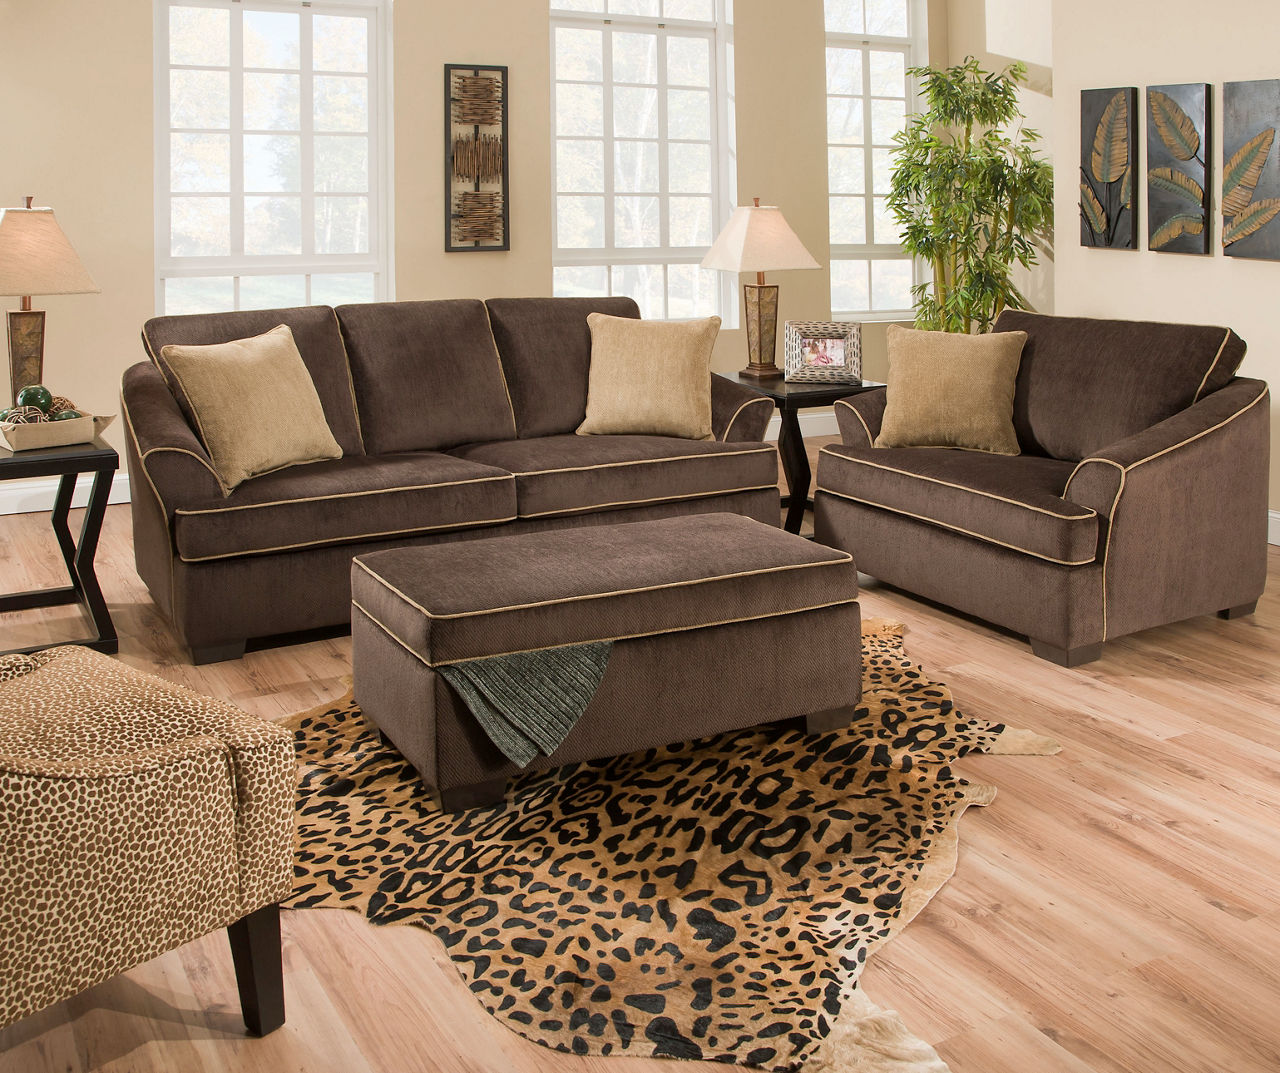 Sequoia Living Room Furniture Collection Big Lots